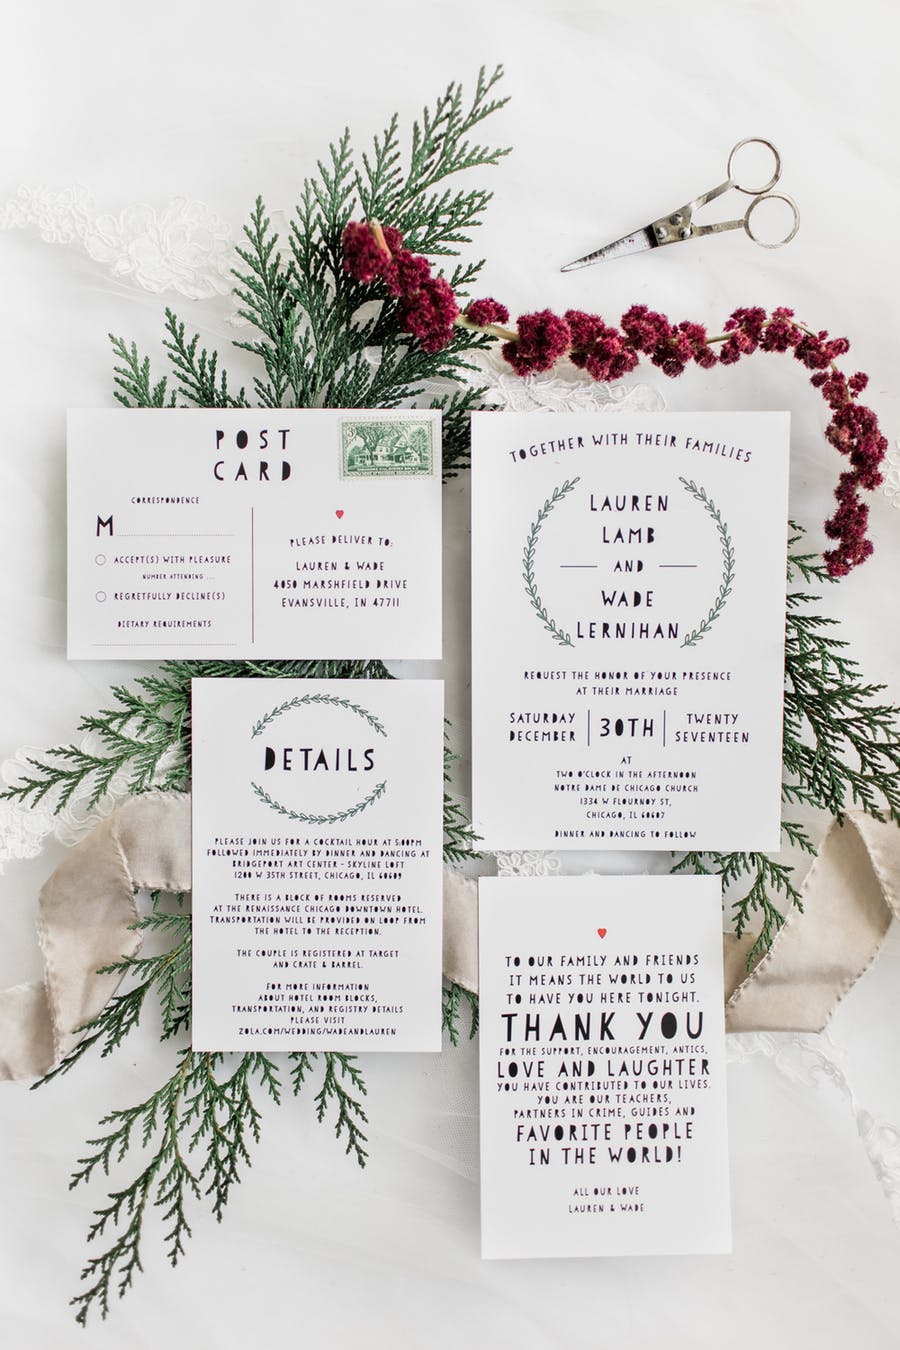 The wedding invitation suite was done in black and white with touches of greenery